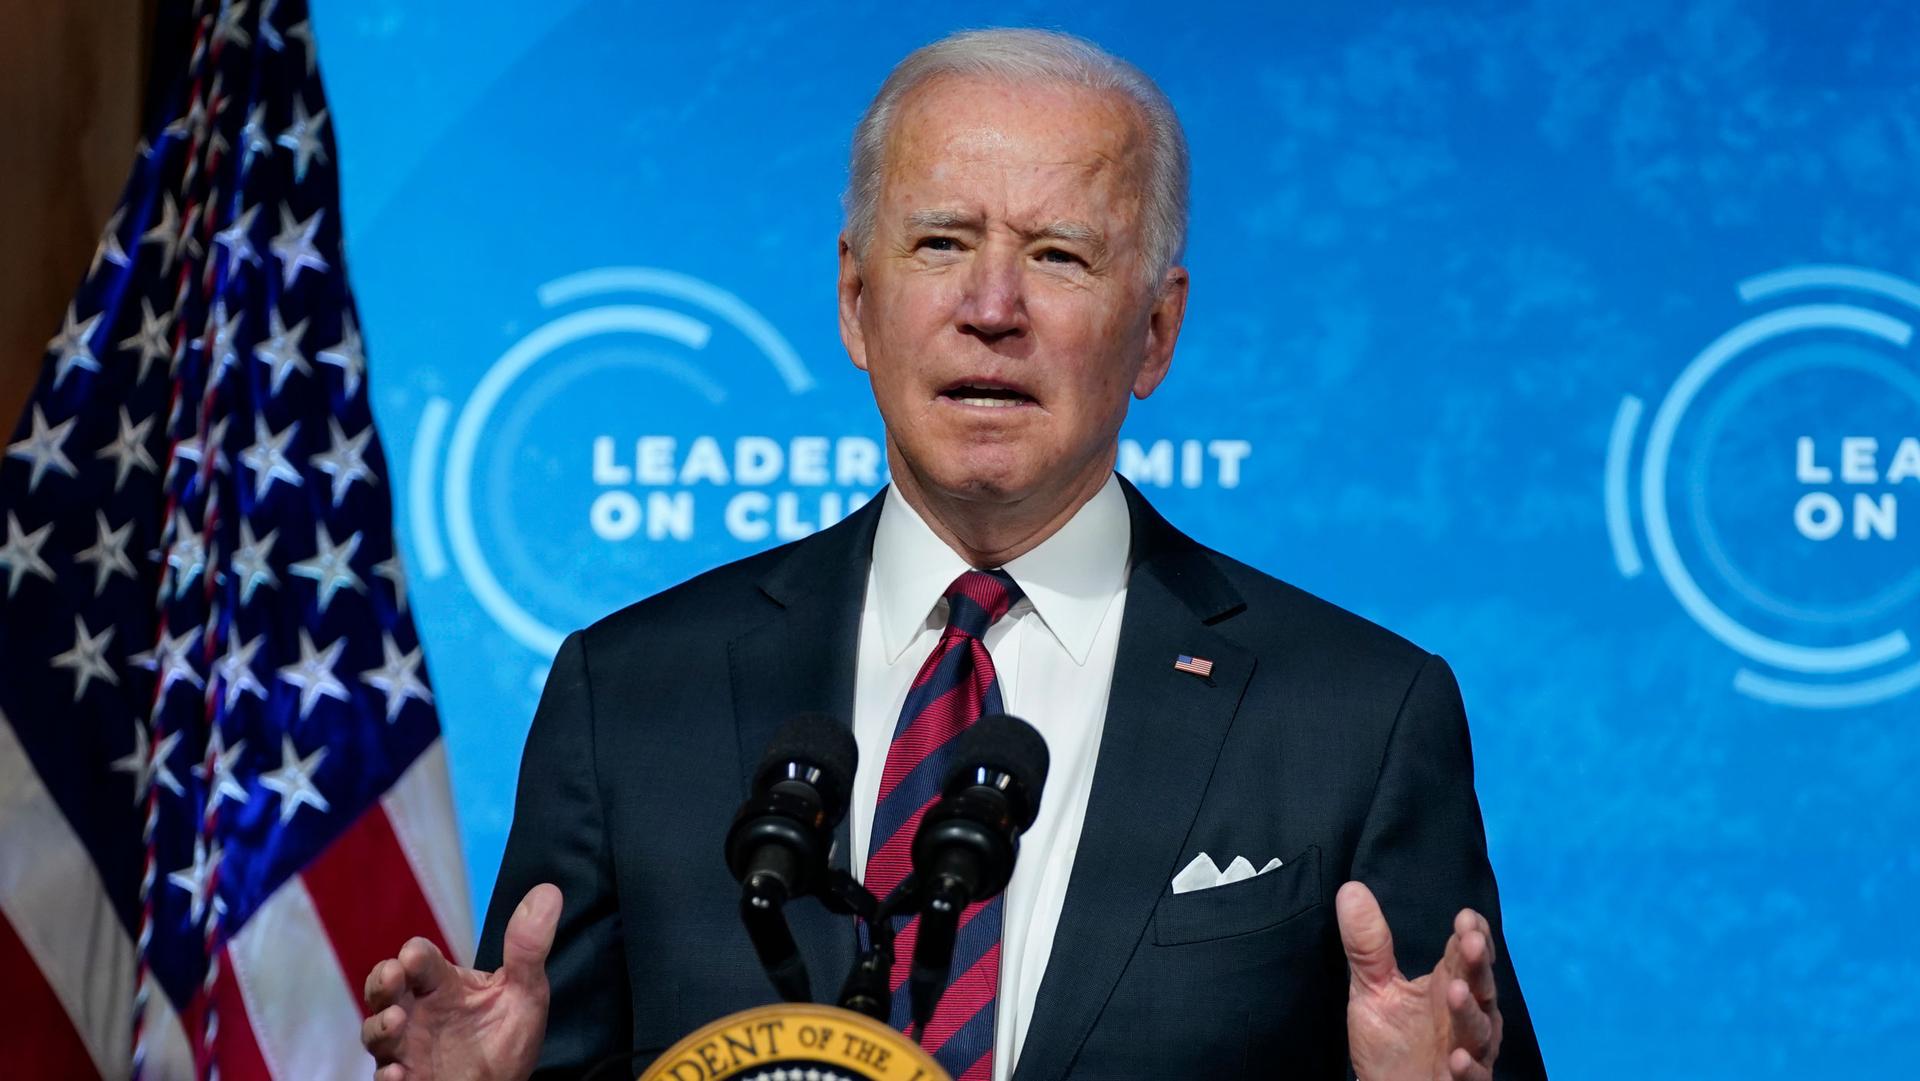 US President Joe Biden is shown standing at a podium wearing a suit and tie with an US flag to his right.